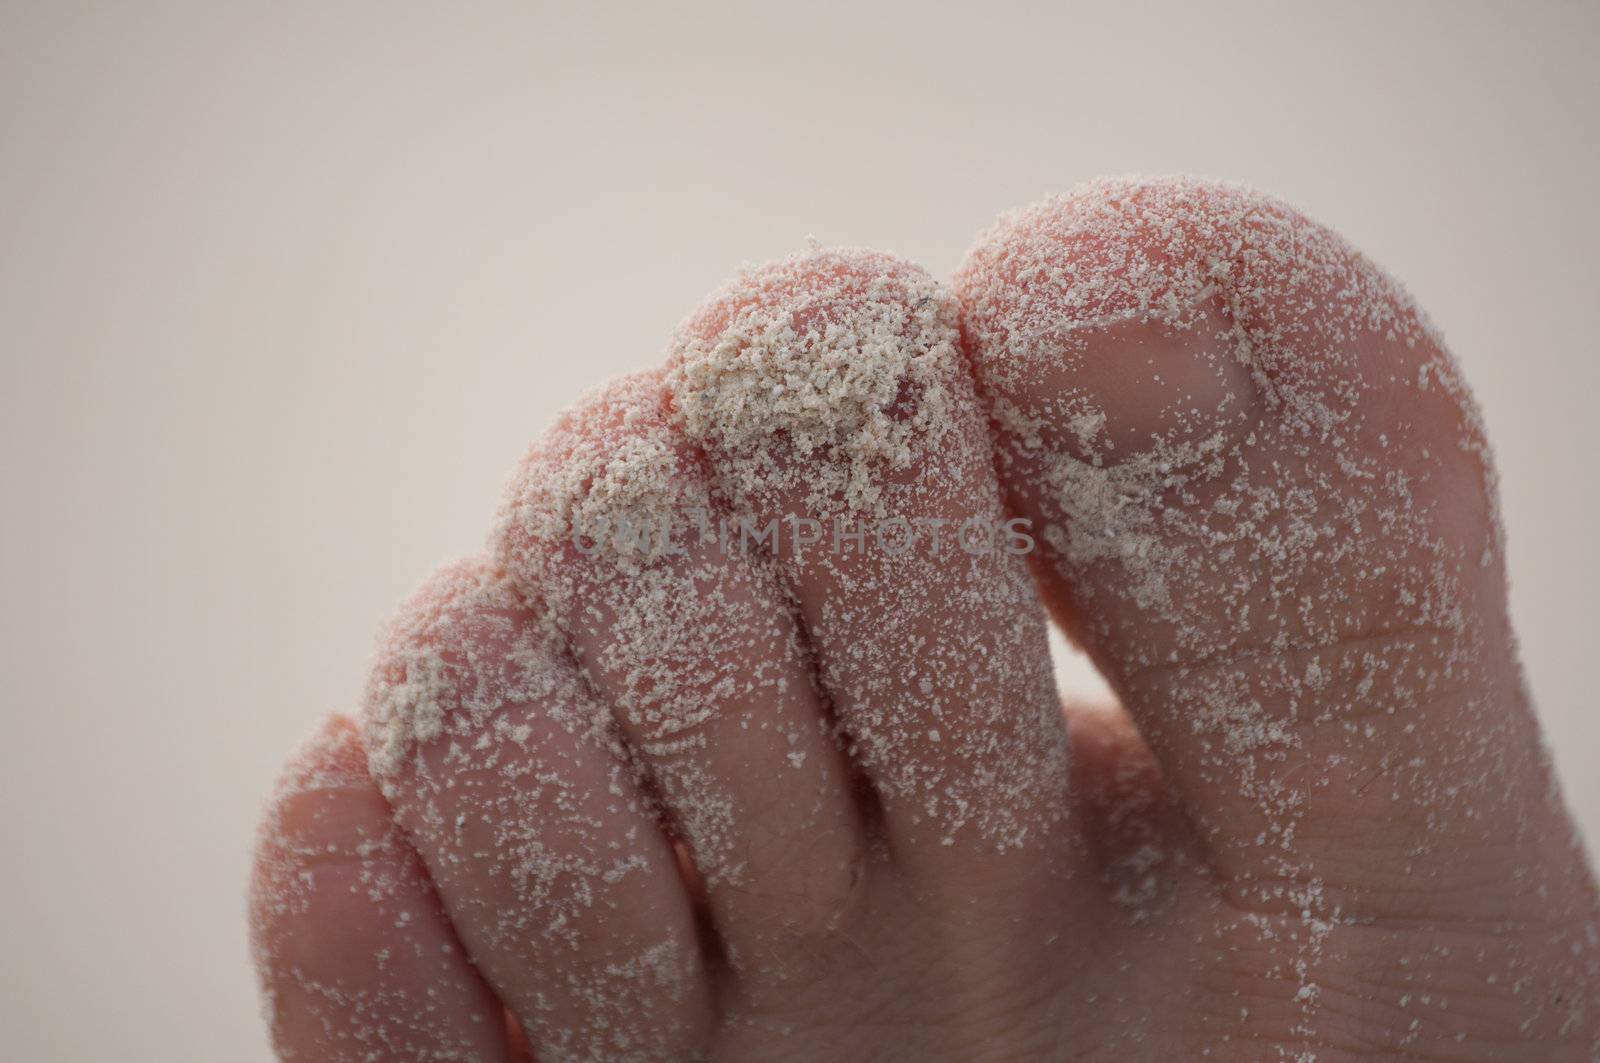 Image of toes covered with sand.